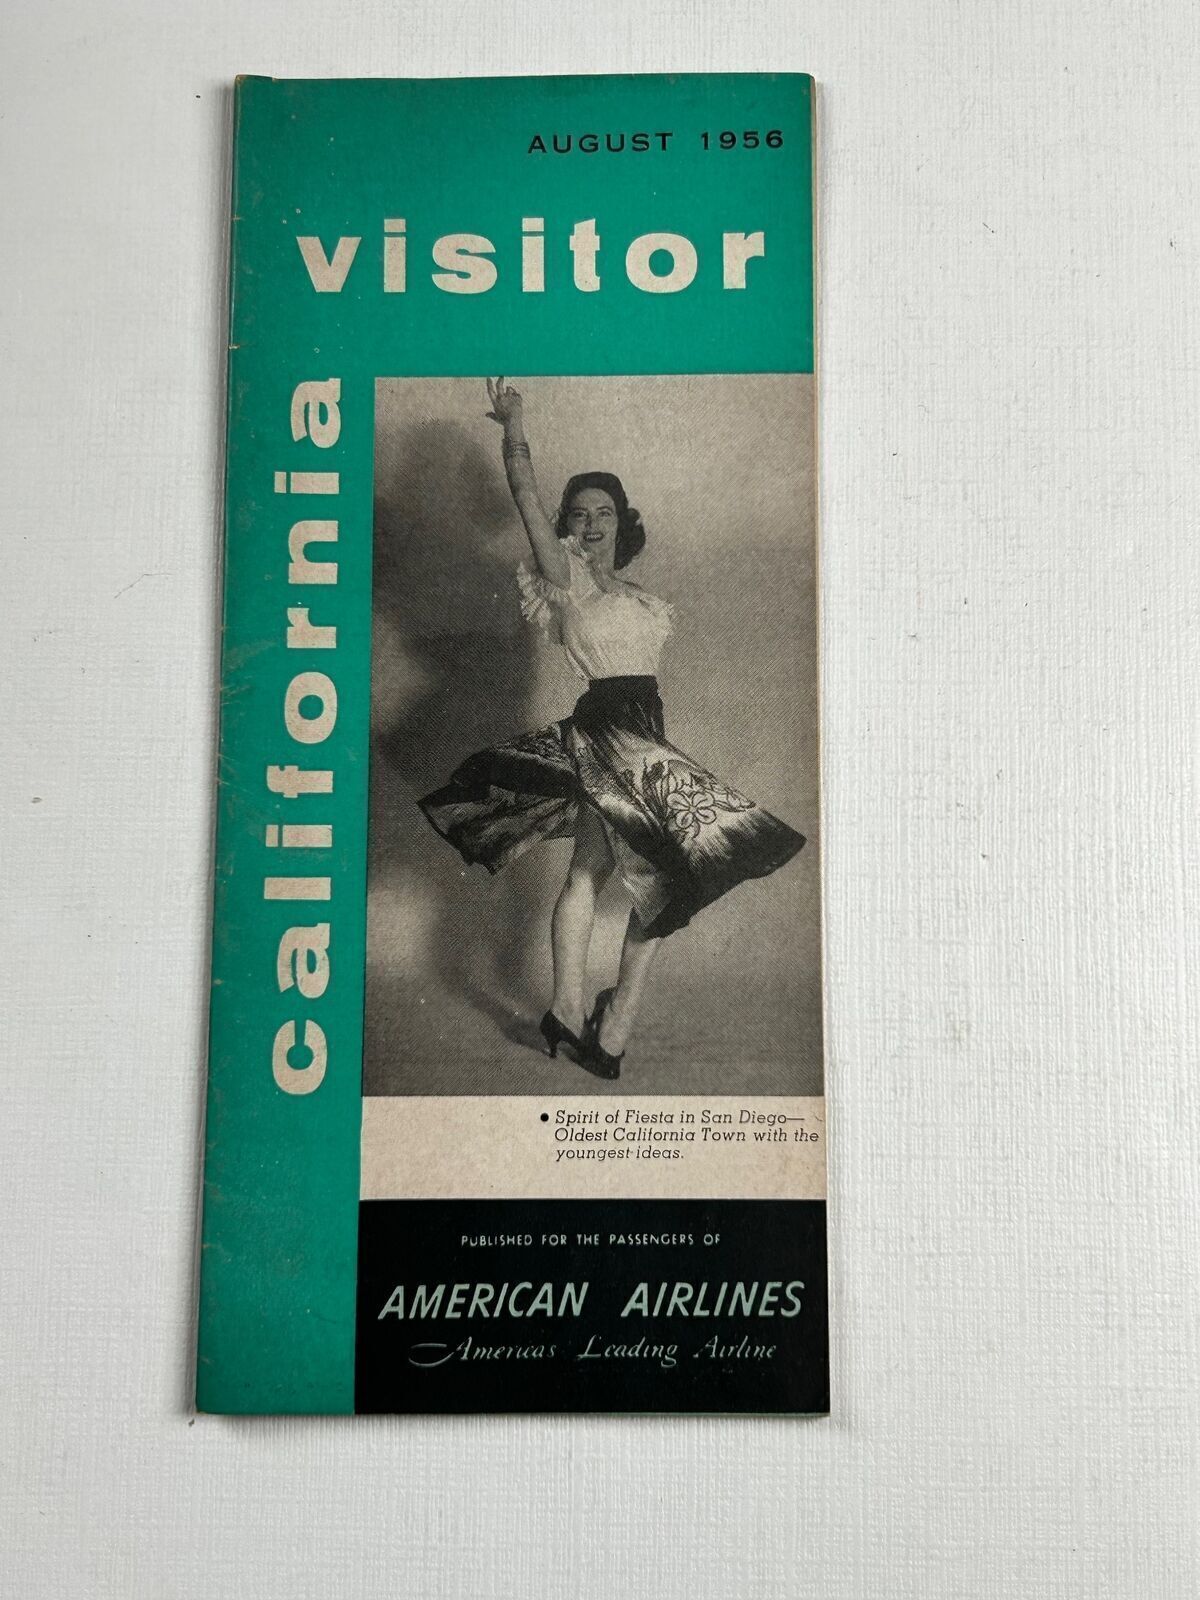 American Airlines California Visitor August 1956 Vintage Travel Brochure